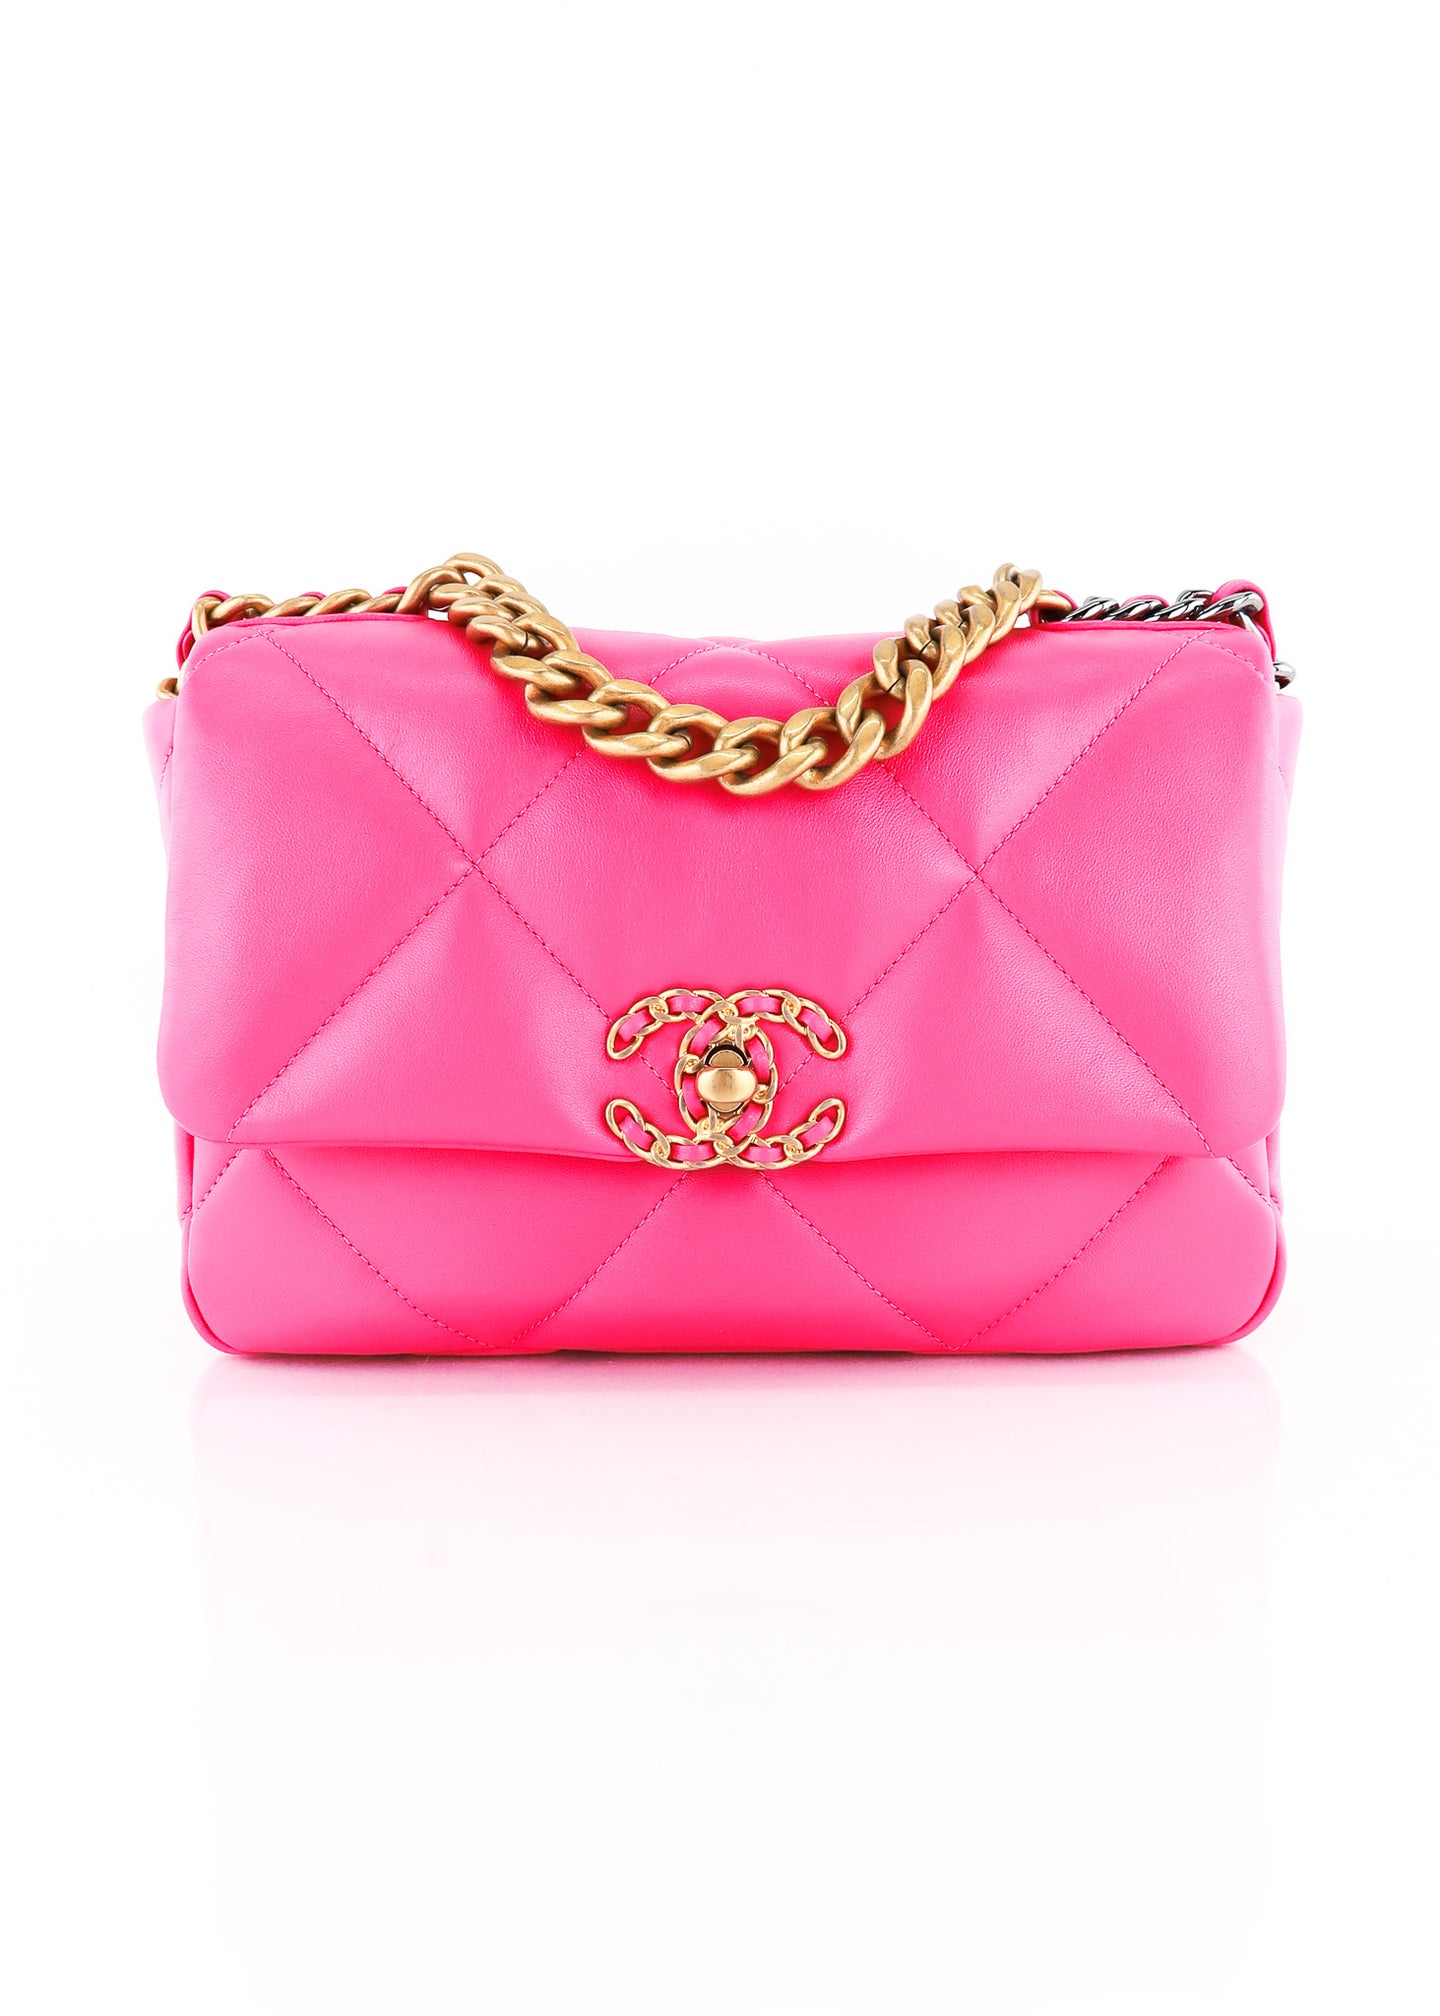 Chanel 19 Quilted Lambskin Medium Flap Pink